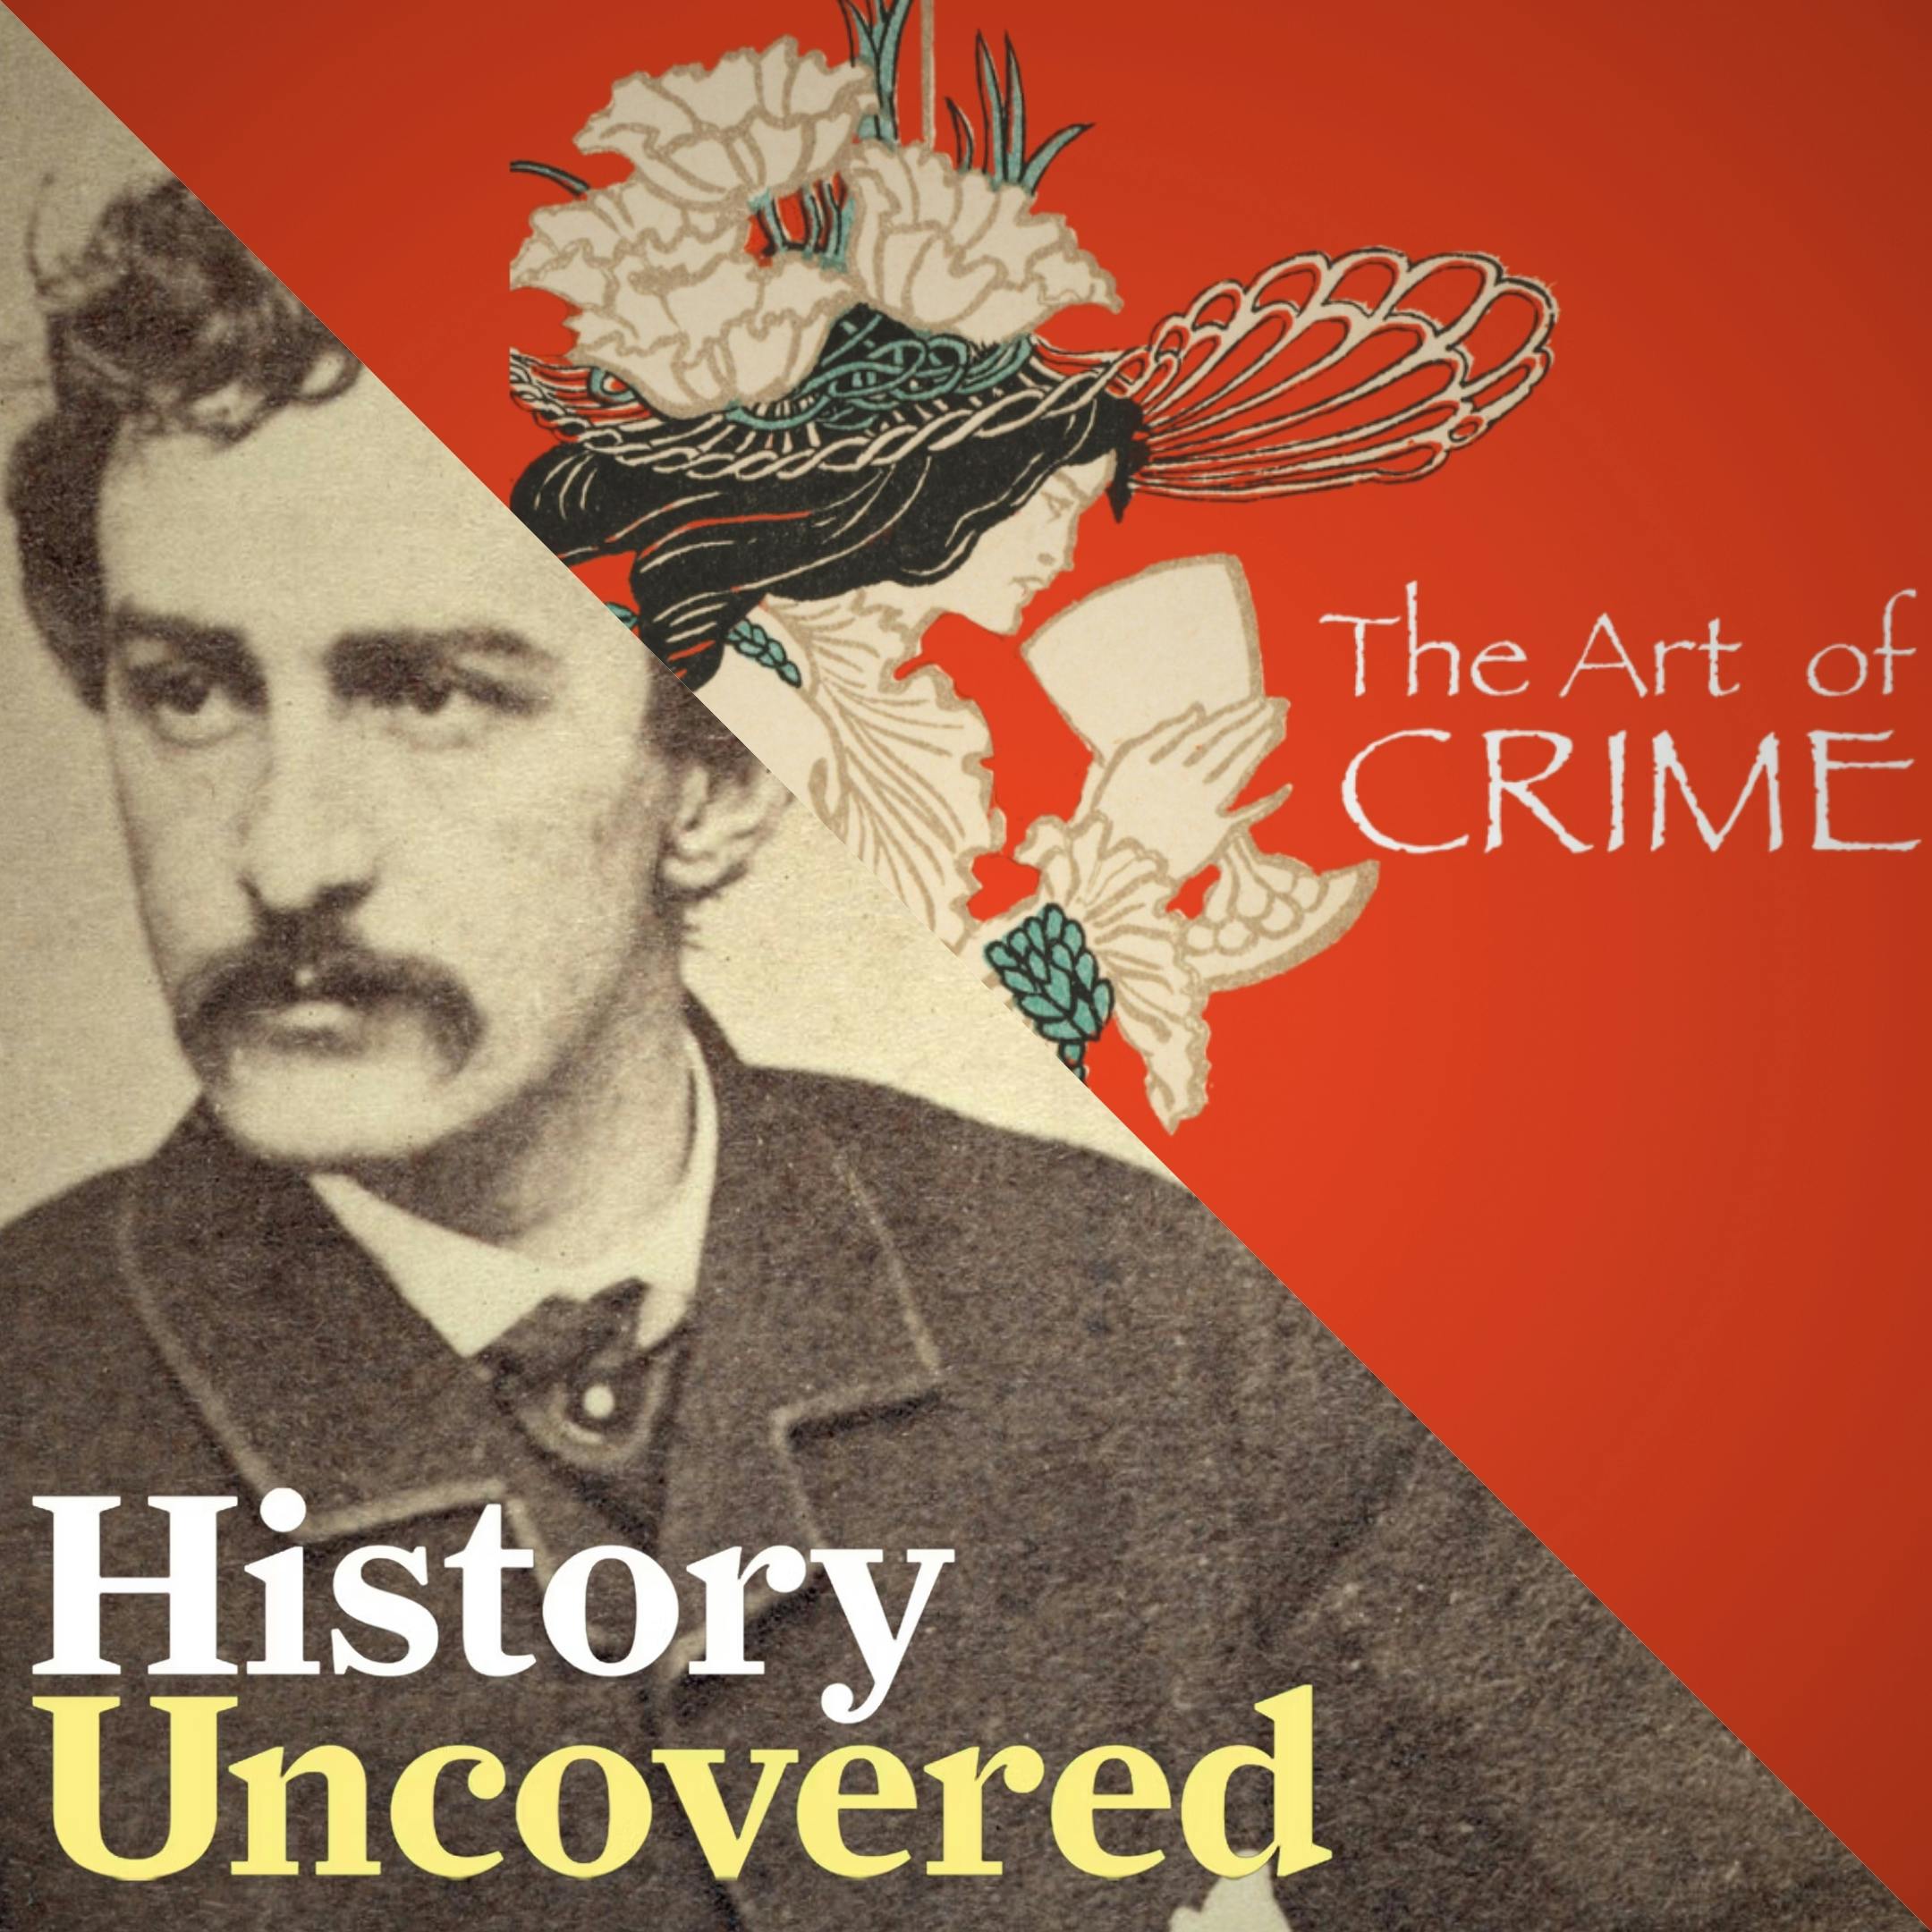 John Wilkes Booth: A Discussion With ‘The Art Of Crime’